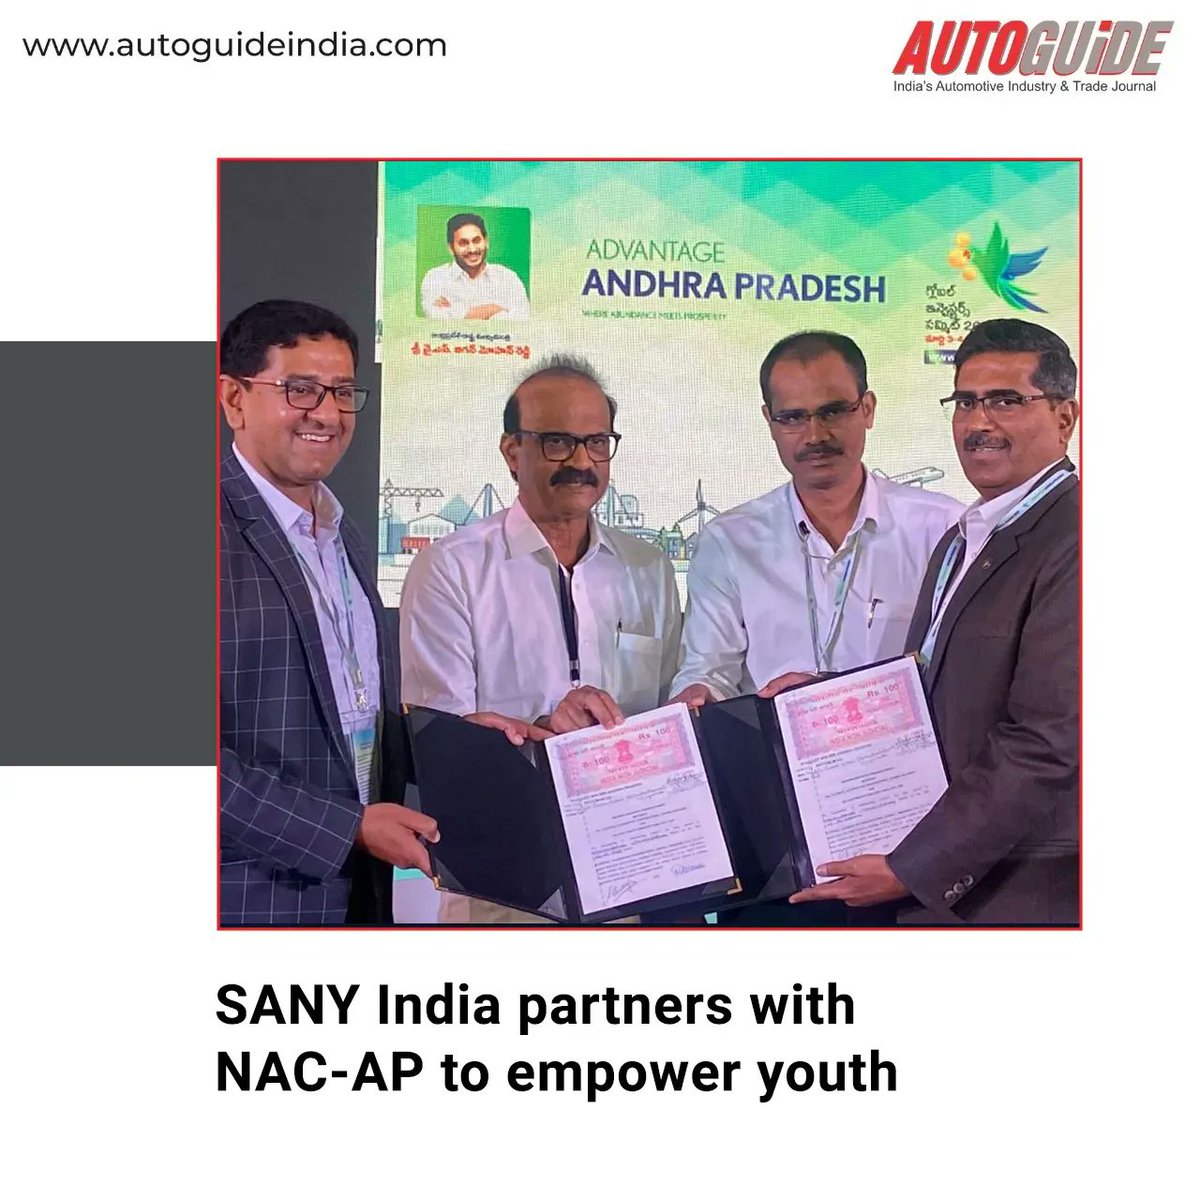 buff.ly/3mTXIql 
SANY India, has partnered with Andhra Pradesh’s National Academy of Construction to train the state’s youth and prepare them for skilled employment opportunities. 
Full article on the website, link on top 
#partnership #nationalacademy #youth #NACAP